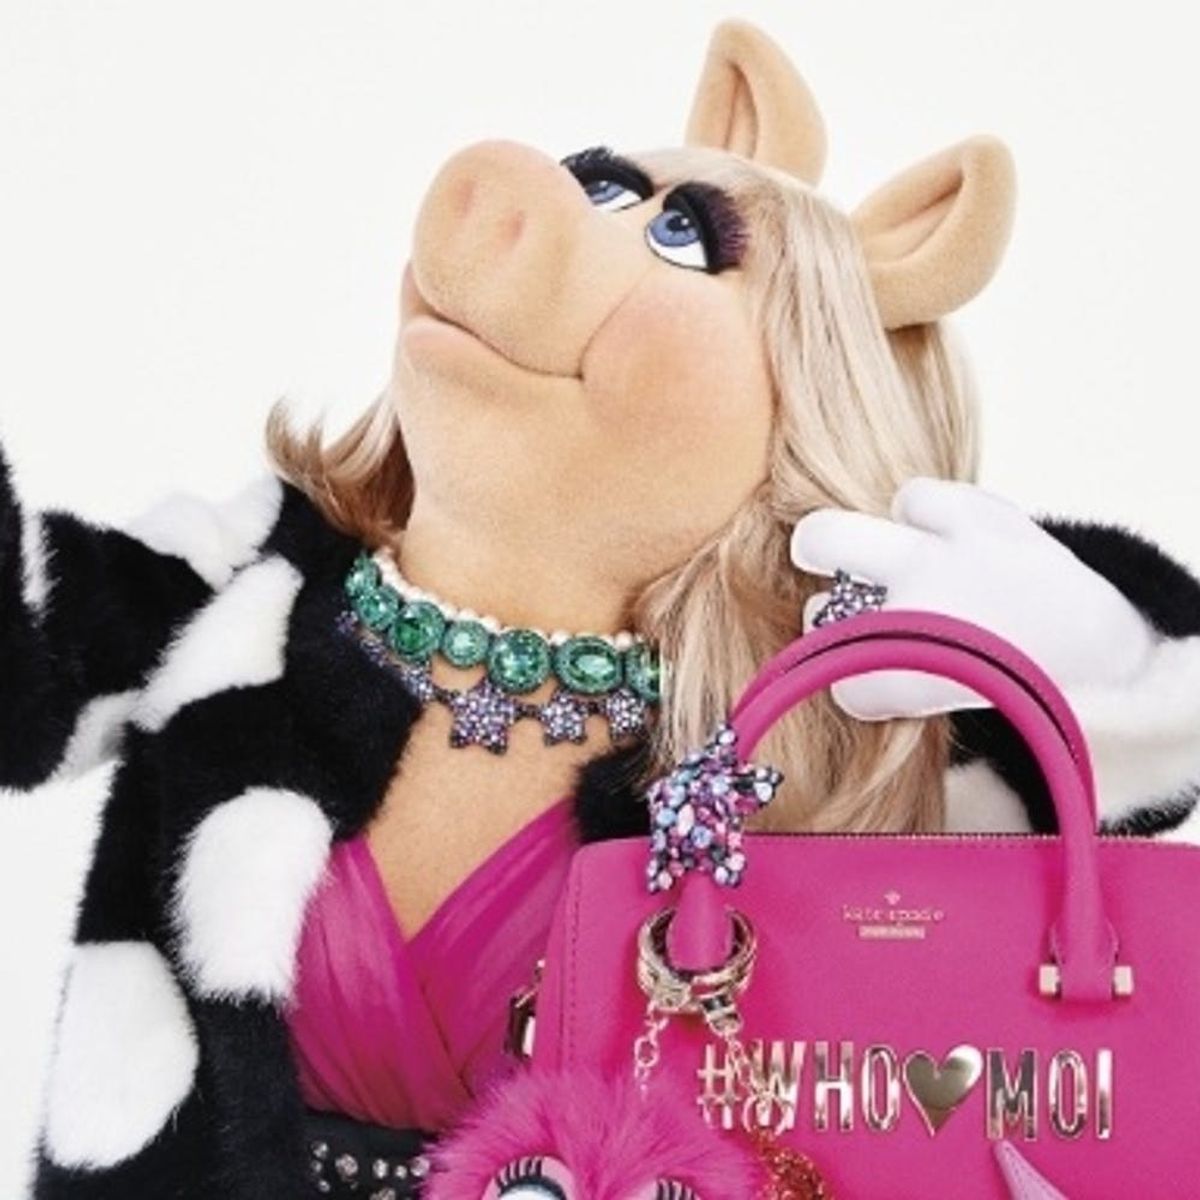 Get Ready for a Major Fashion Collab Between Miss Piggy and Kate Spade